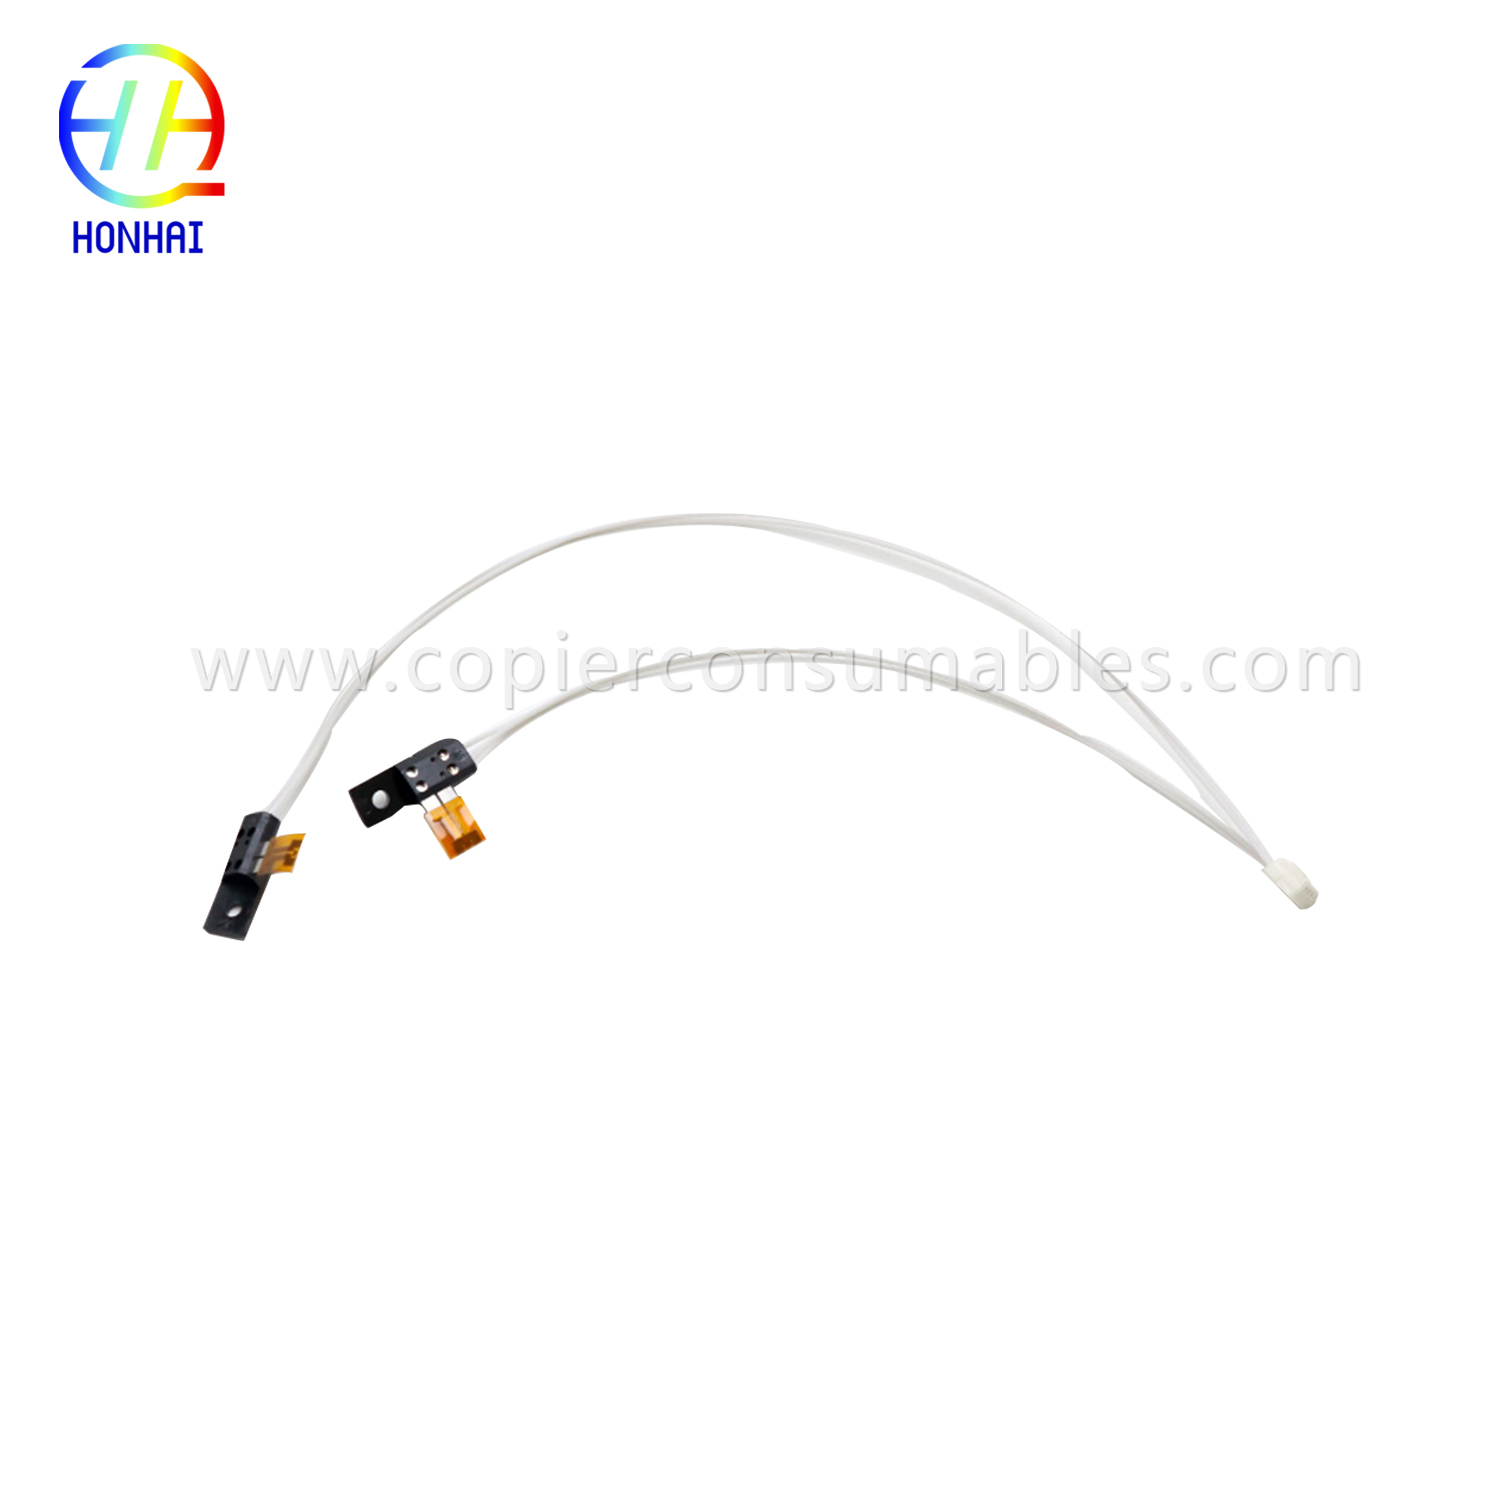 Fuser Unit Thermistor for Xerox P4 3370 3375 3373 7830 7835 7845 7855 7525 7535 7545 7556 4470 4475 5570 5575 Original Disassembly Accessories  (1)